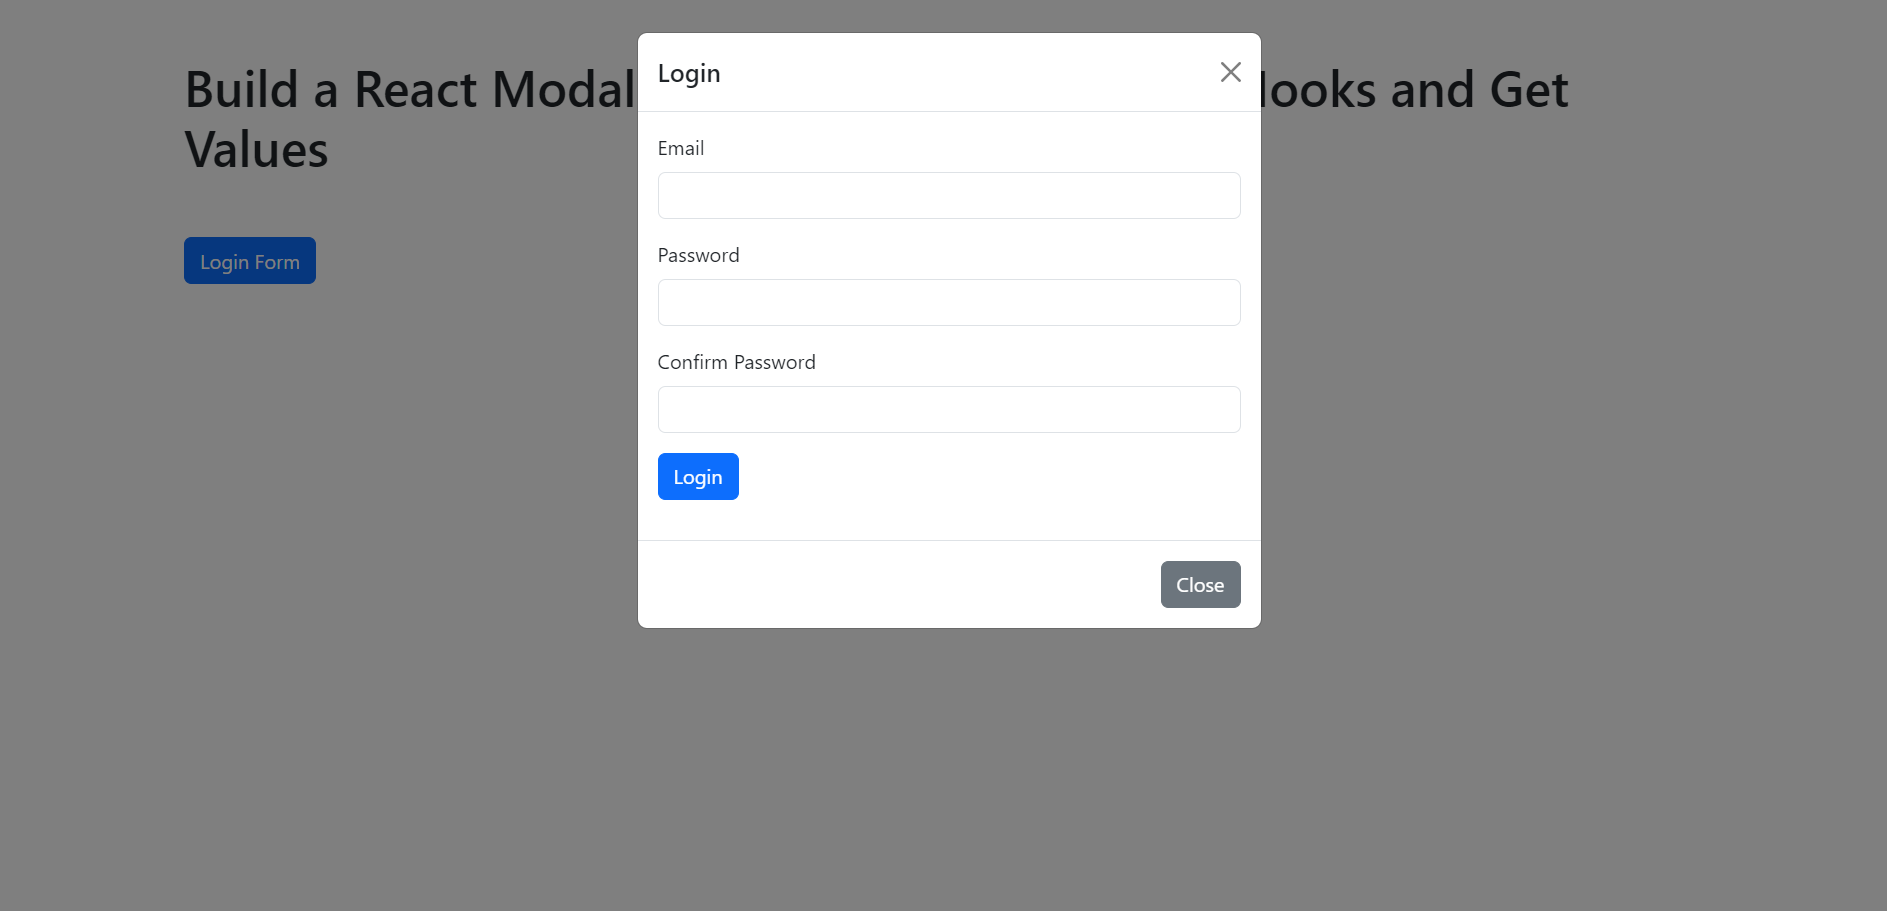 Build a React Modal POP UP Login Form With Hooks and Get Values